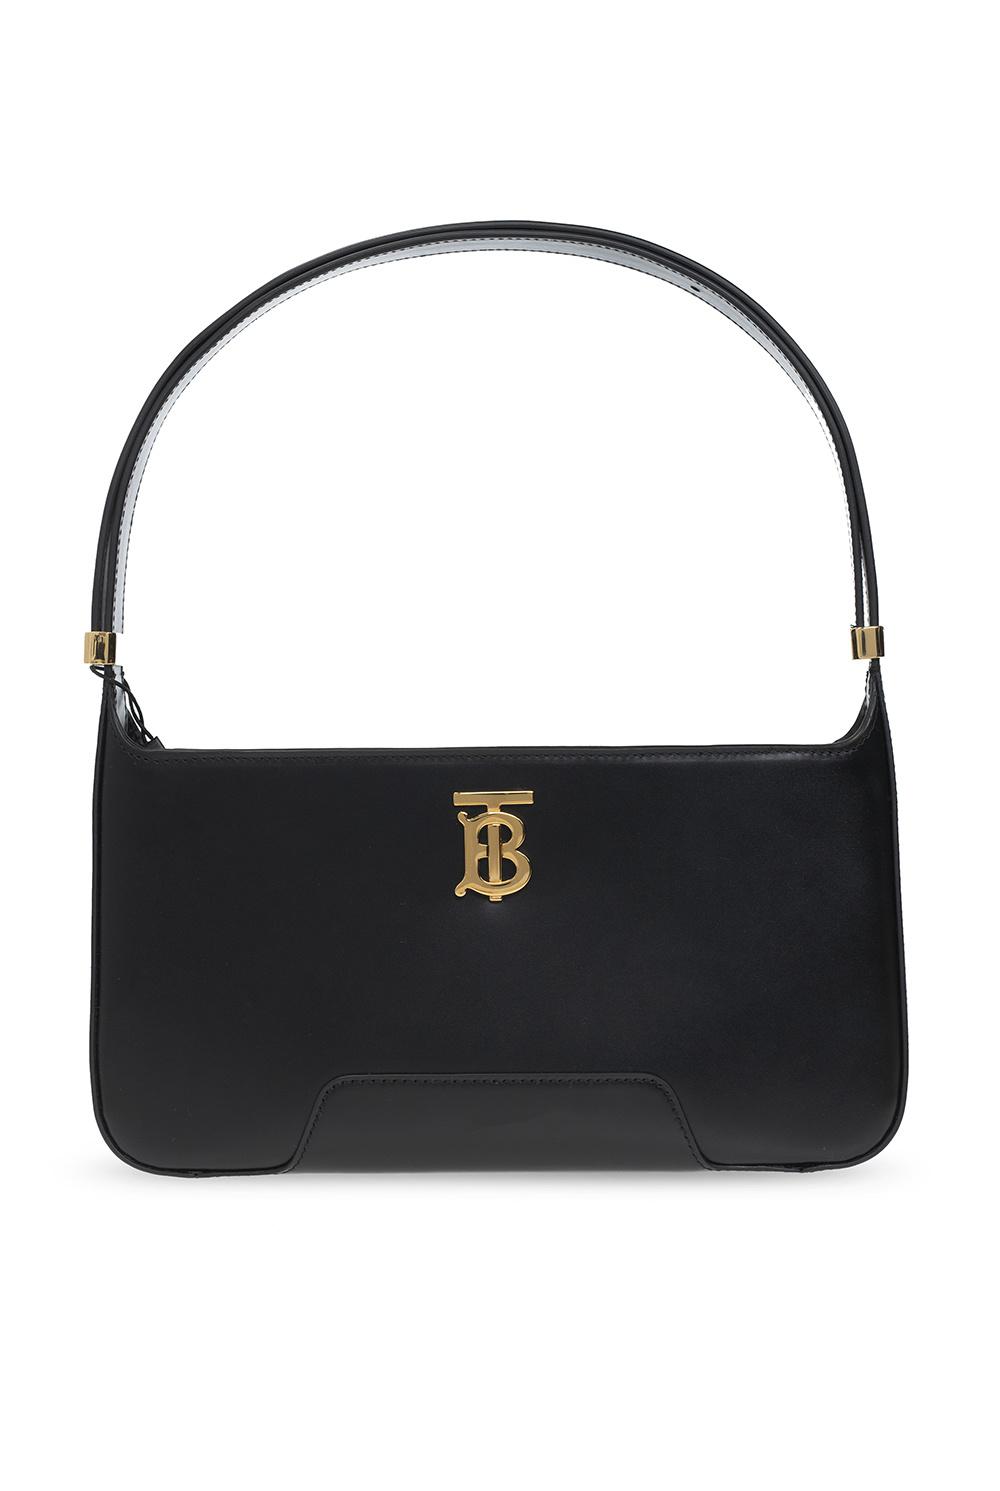 Tb bag leather crossbody bag Burberry Black in Leather - 29411015